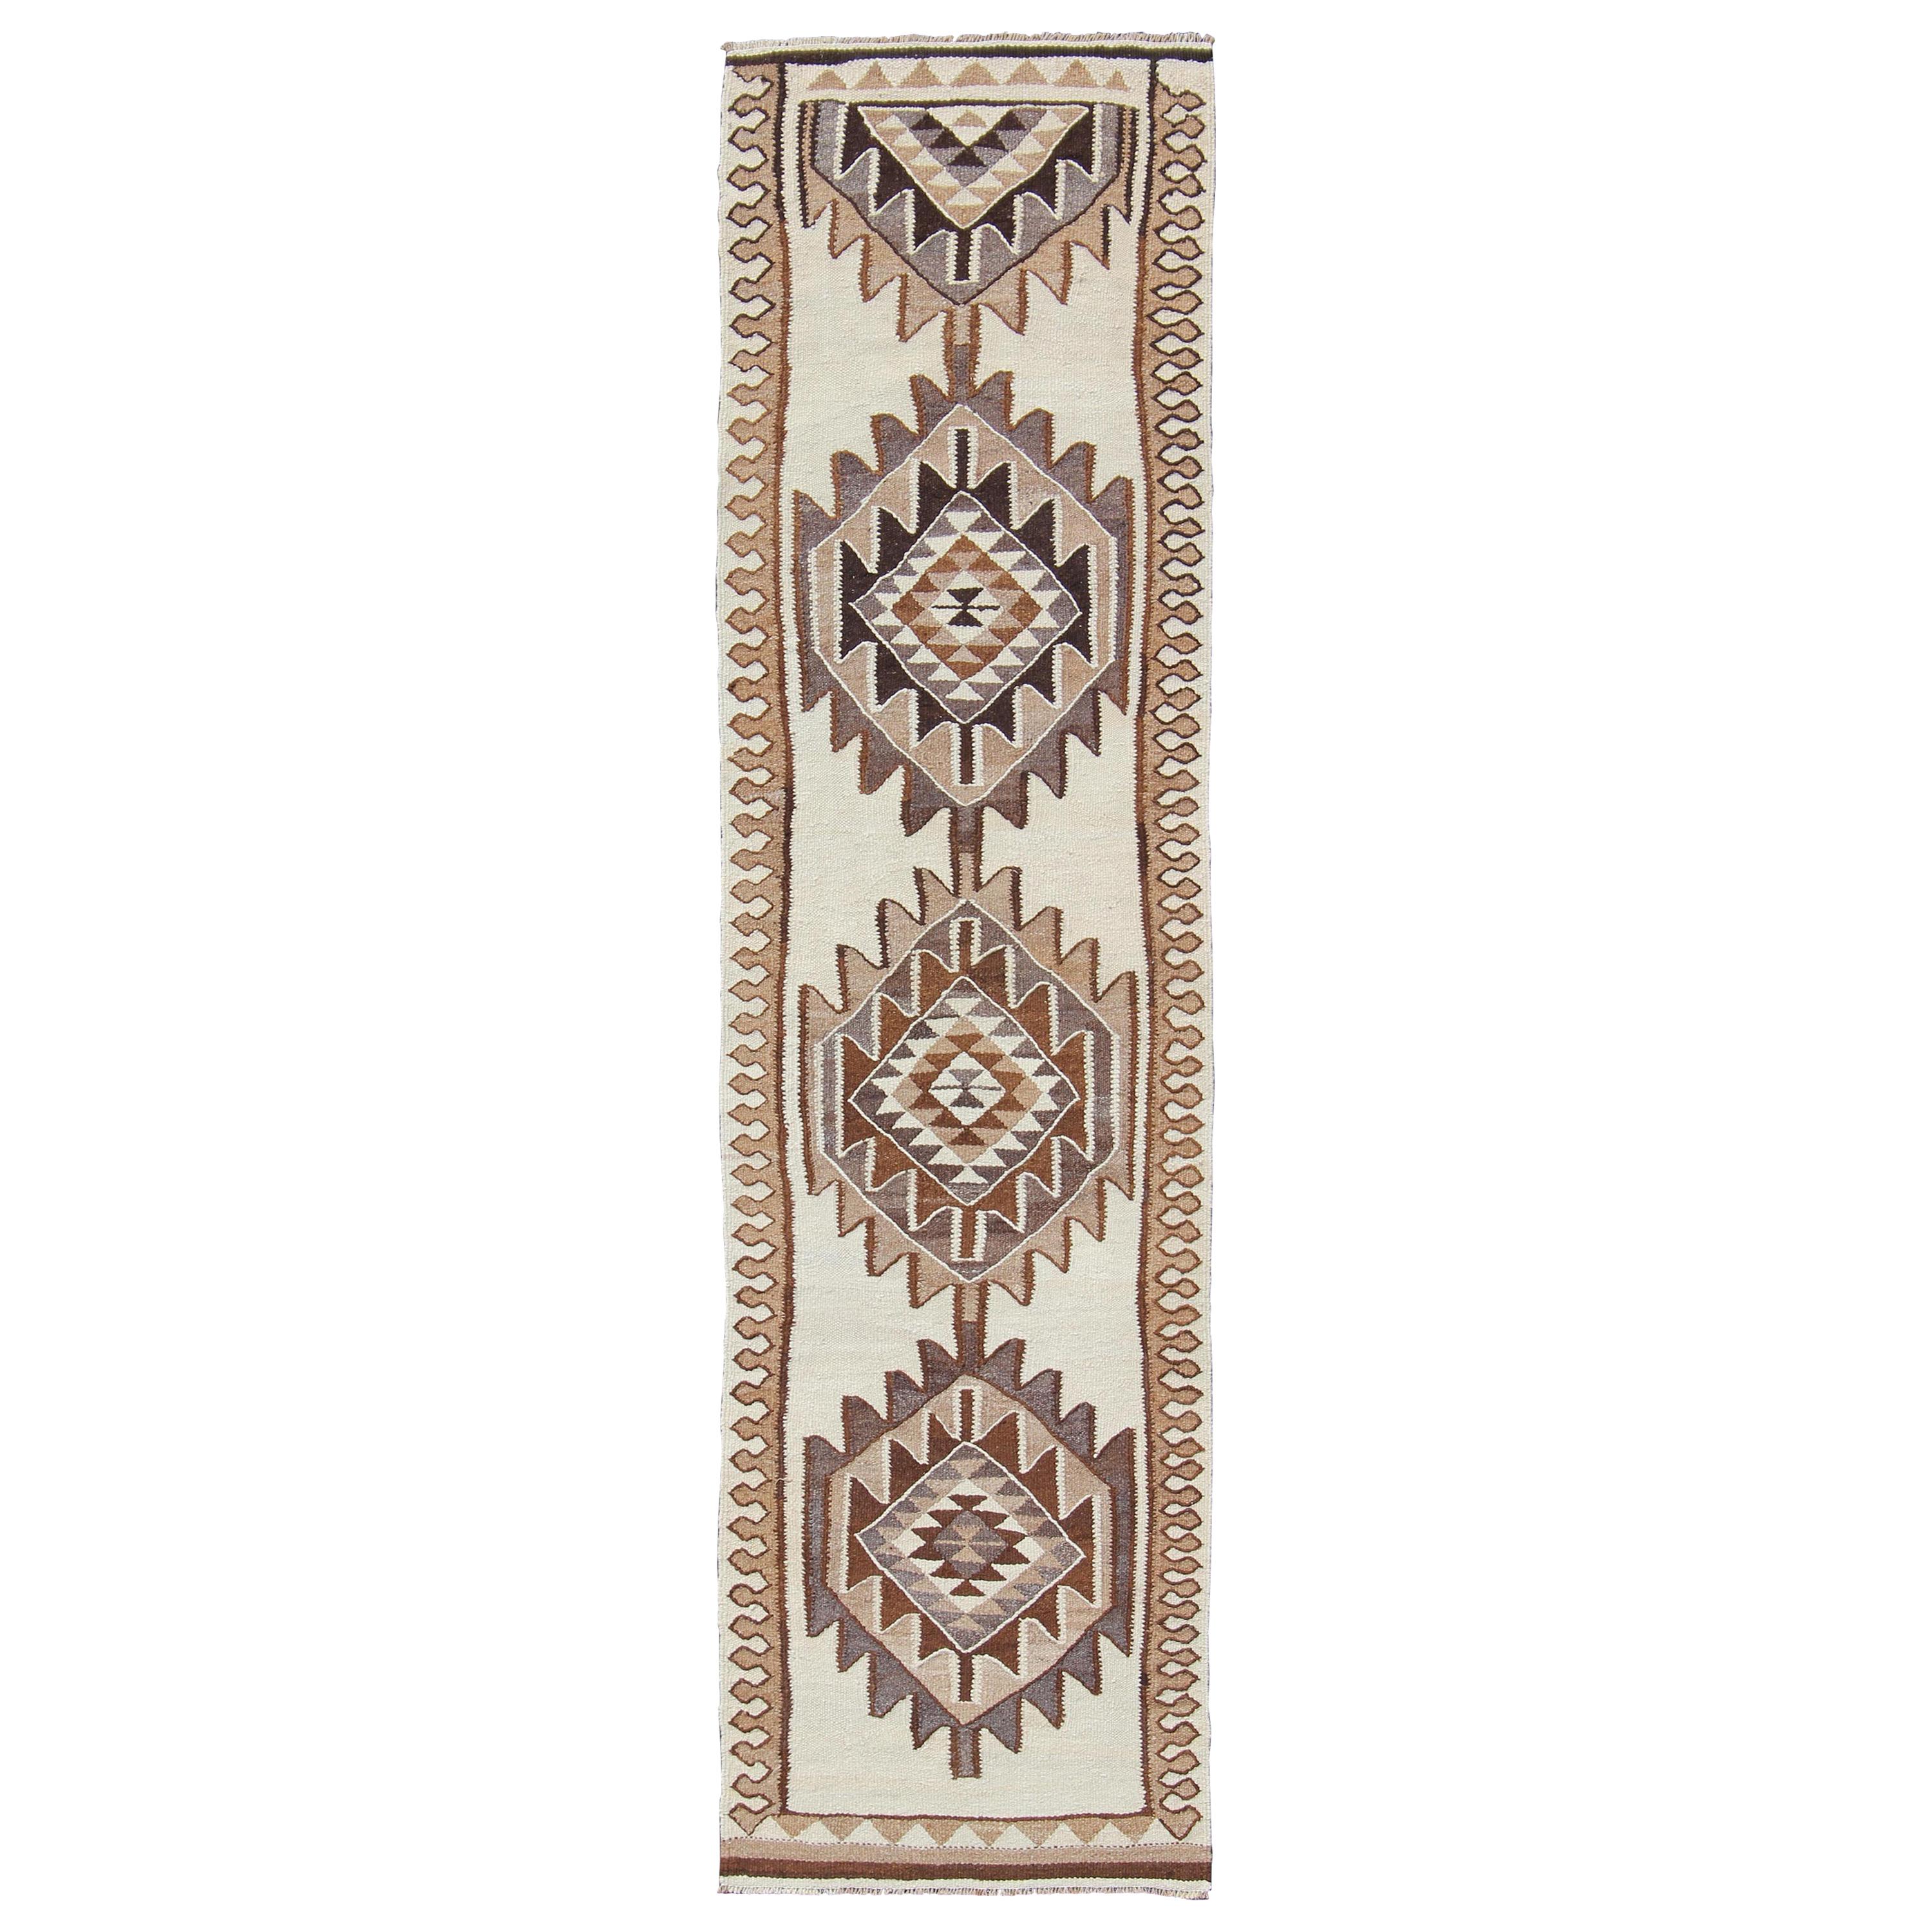 Vintage Turkish Kilim Runner with Tribal Medallions in Shades of Brown and Cream For Sale